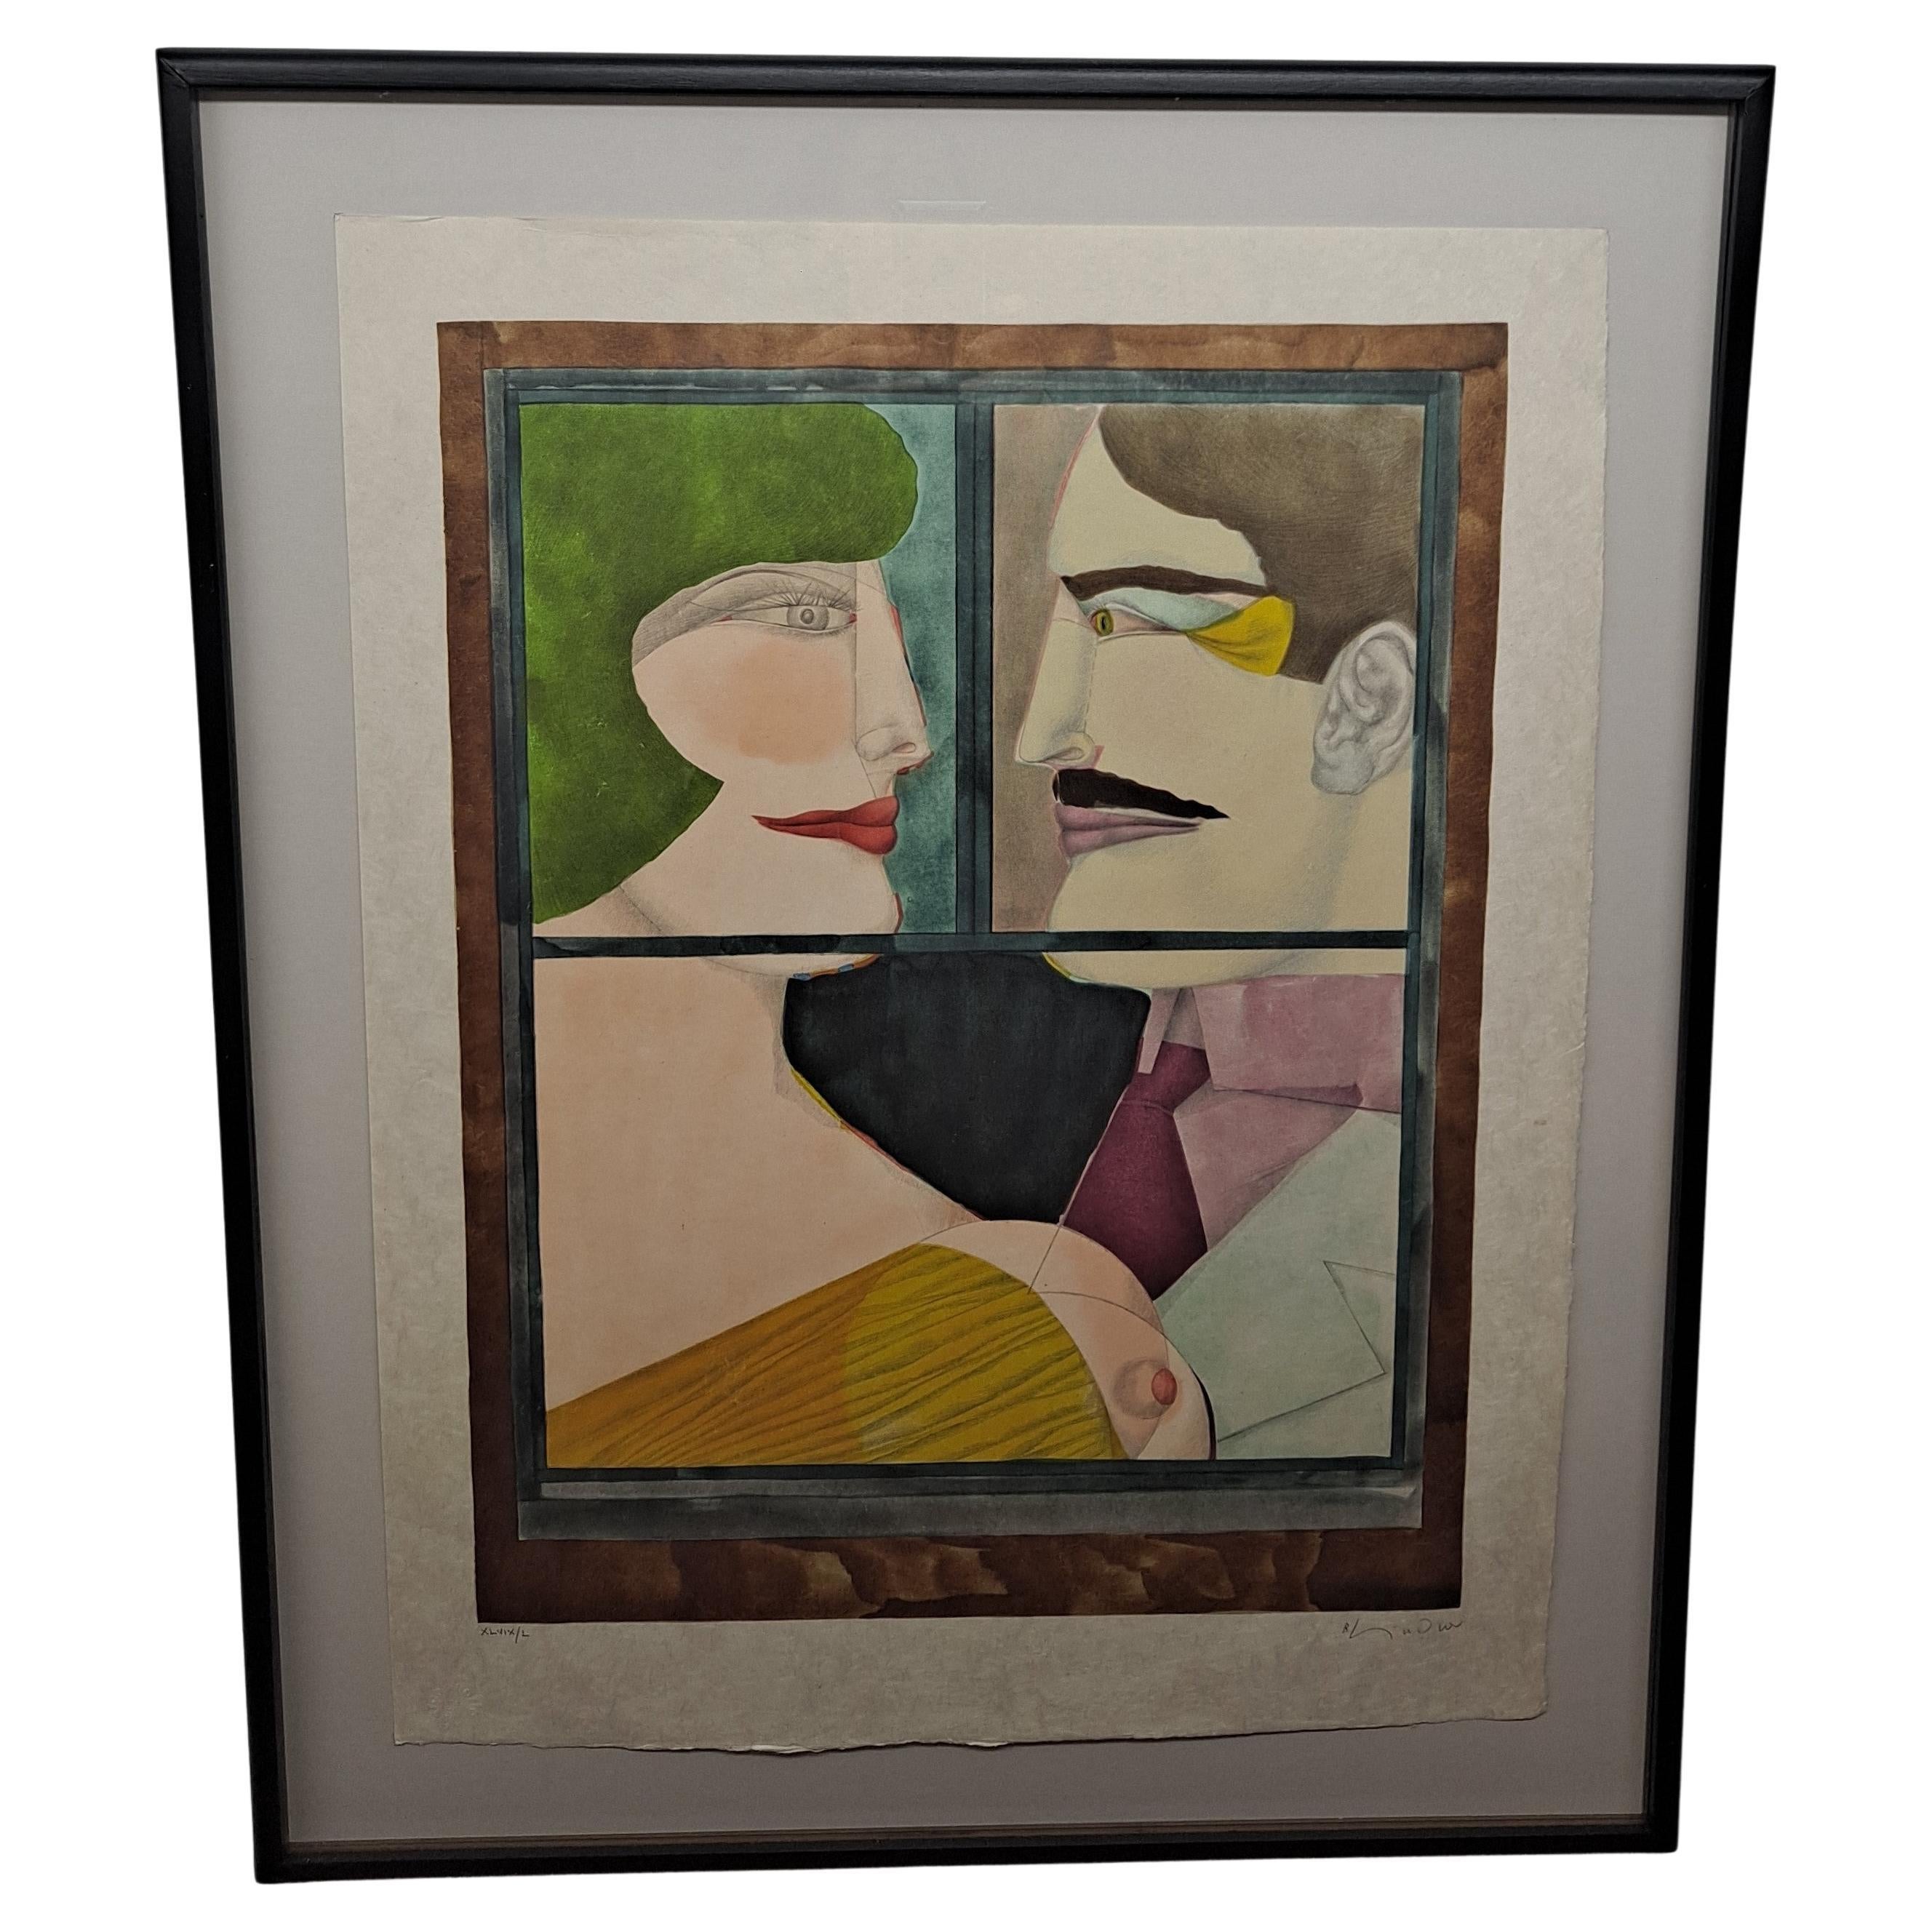 Richard Lindner (German American) 1901 - 1978 Lithograph Signed and Numbered 46/ For Sale